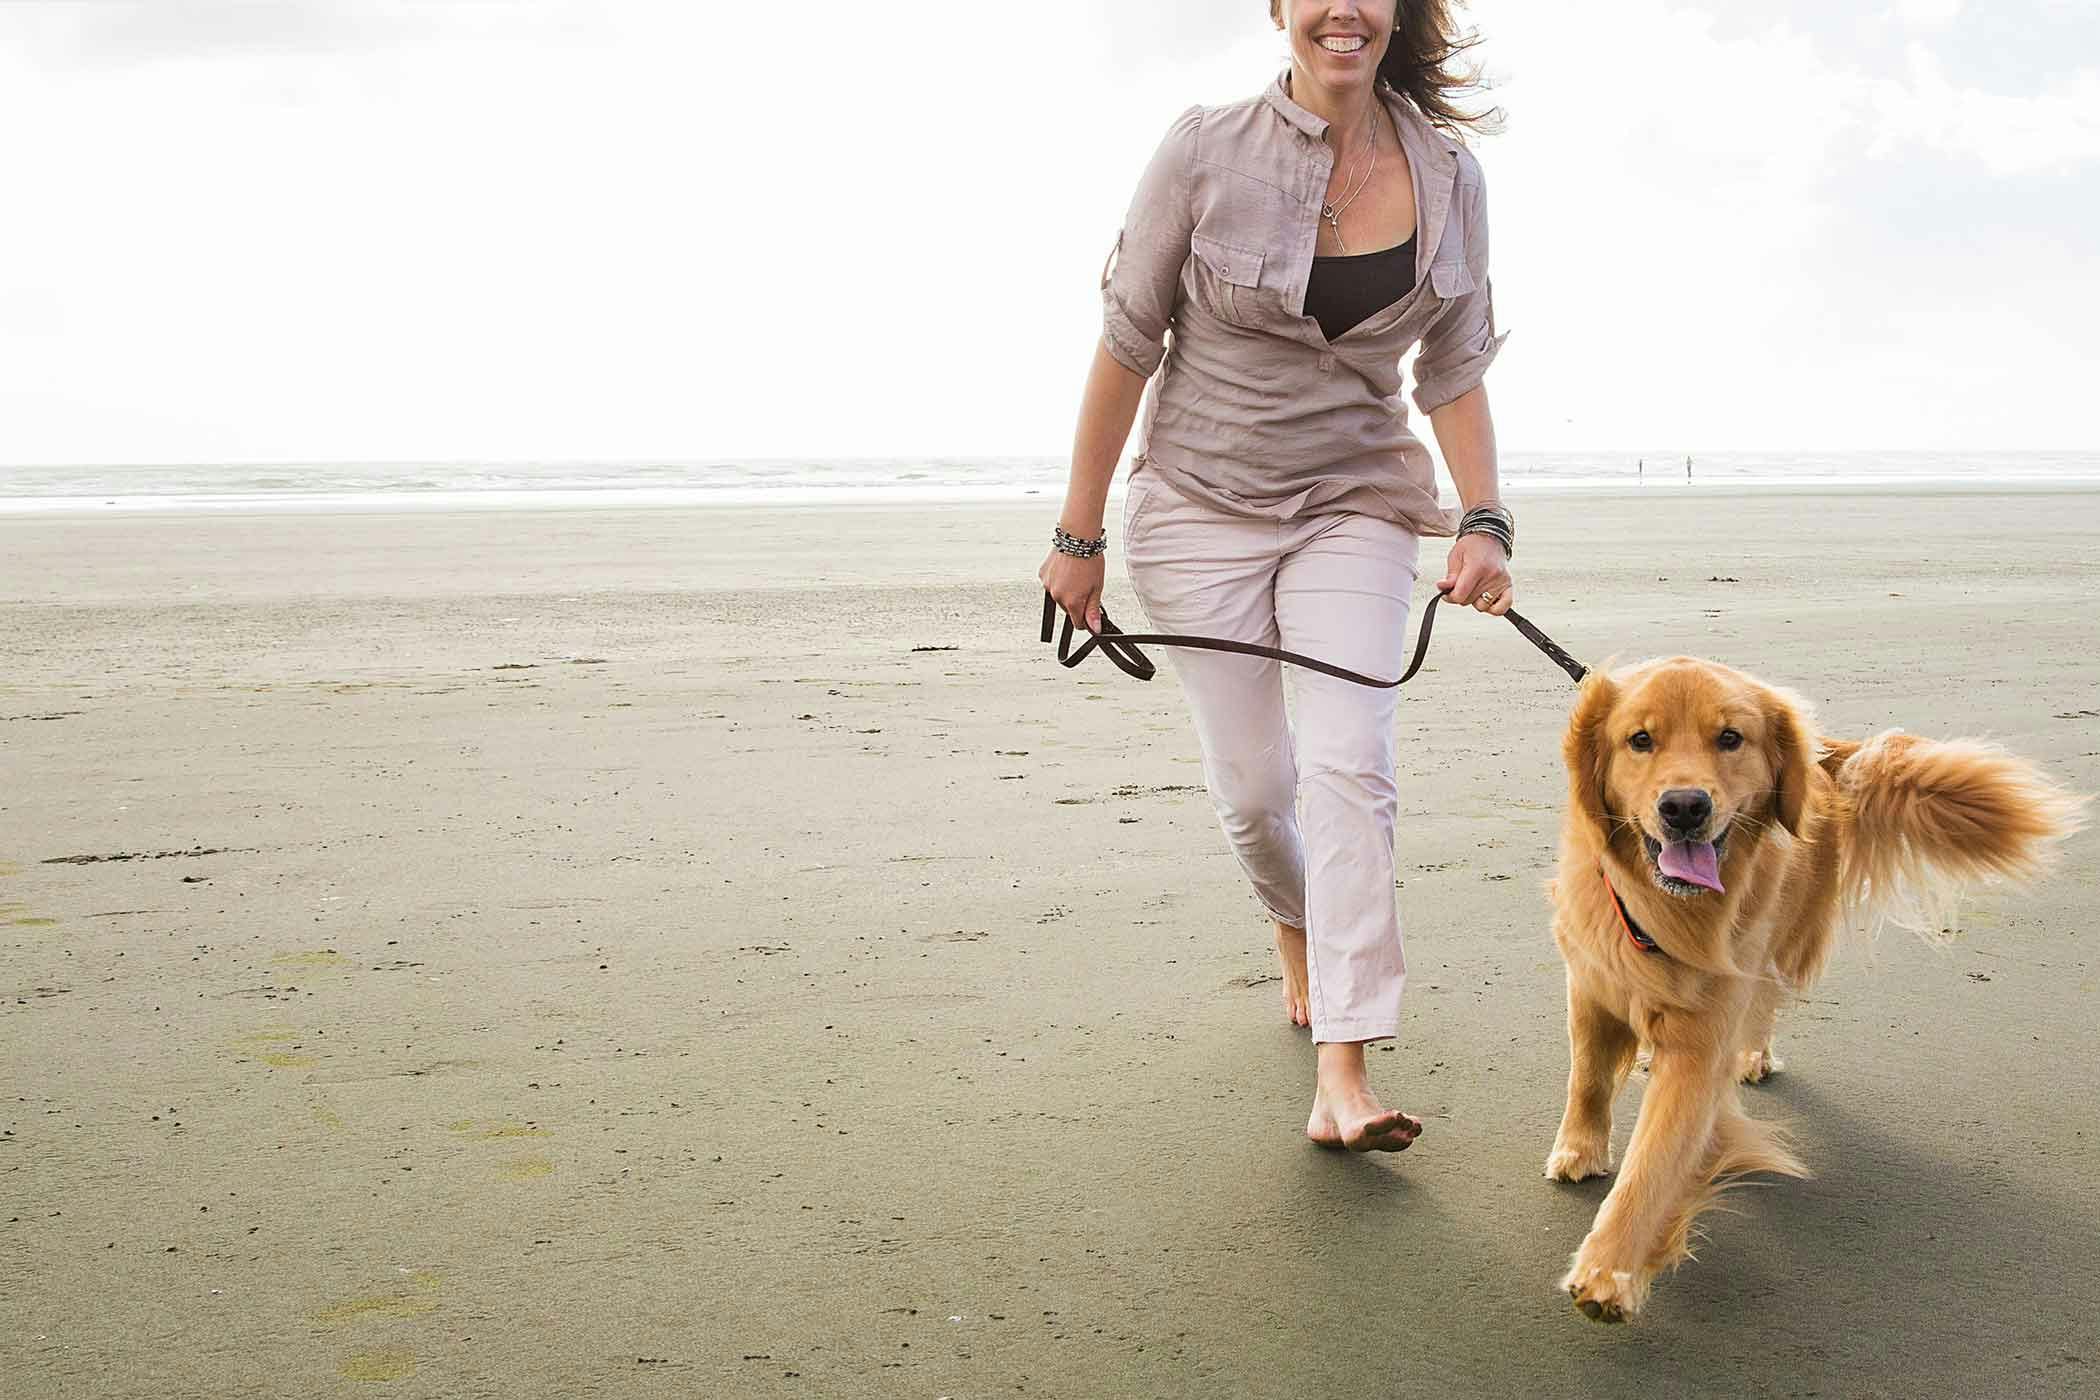 How to Train Your Dog to Walk With You